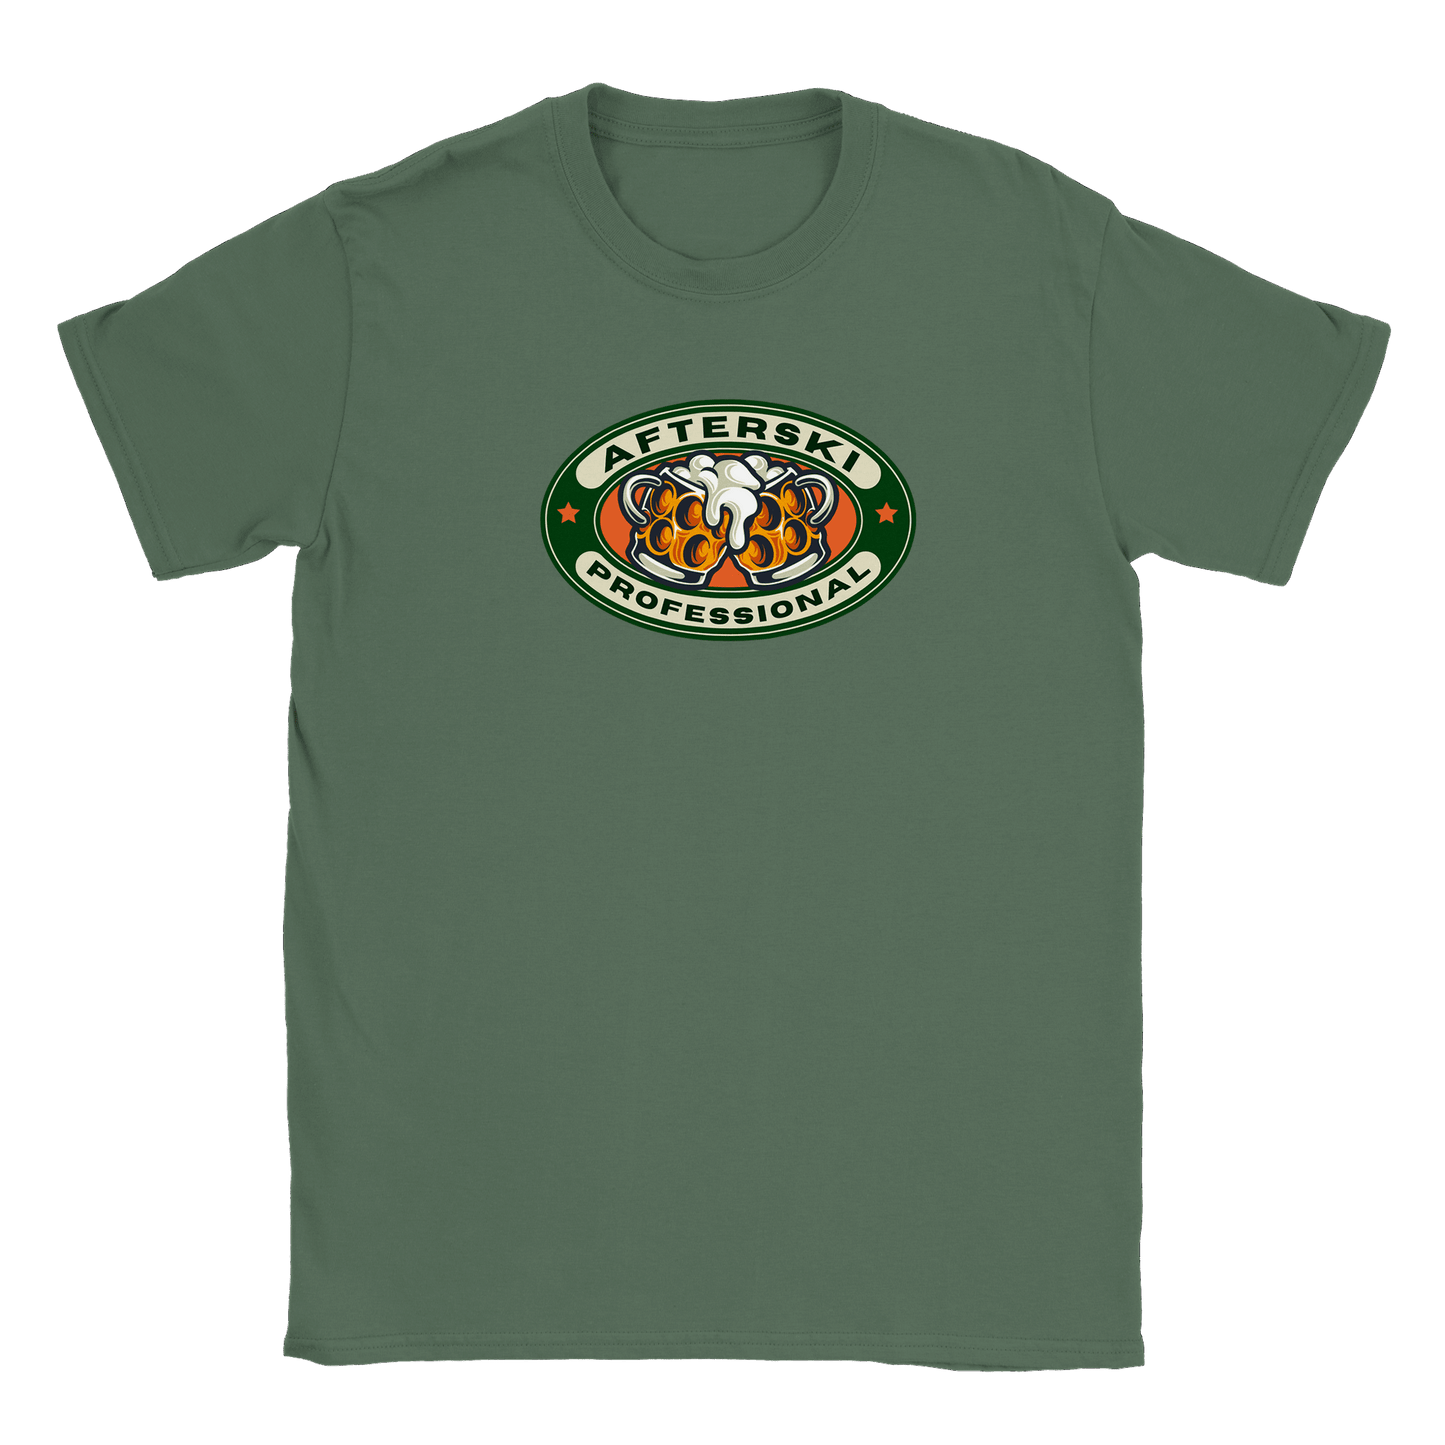 Afterski Professional - T-shirt Military Green